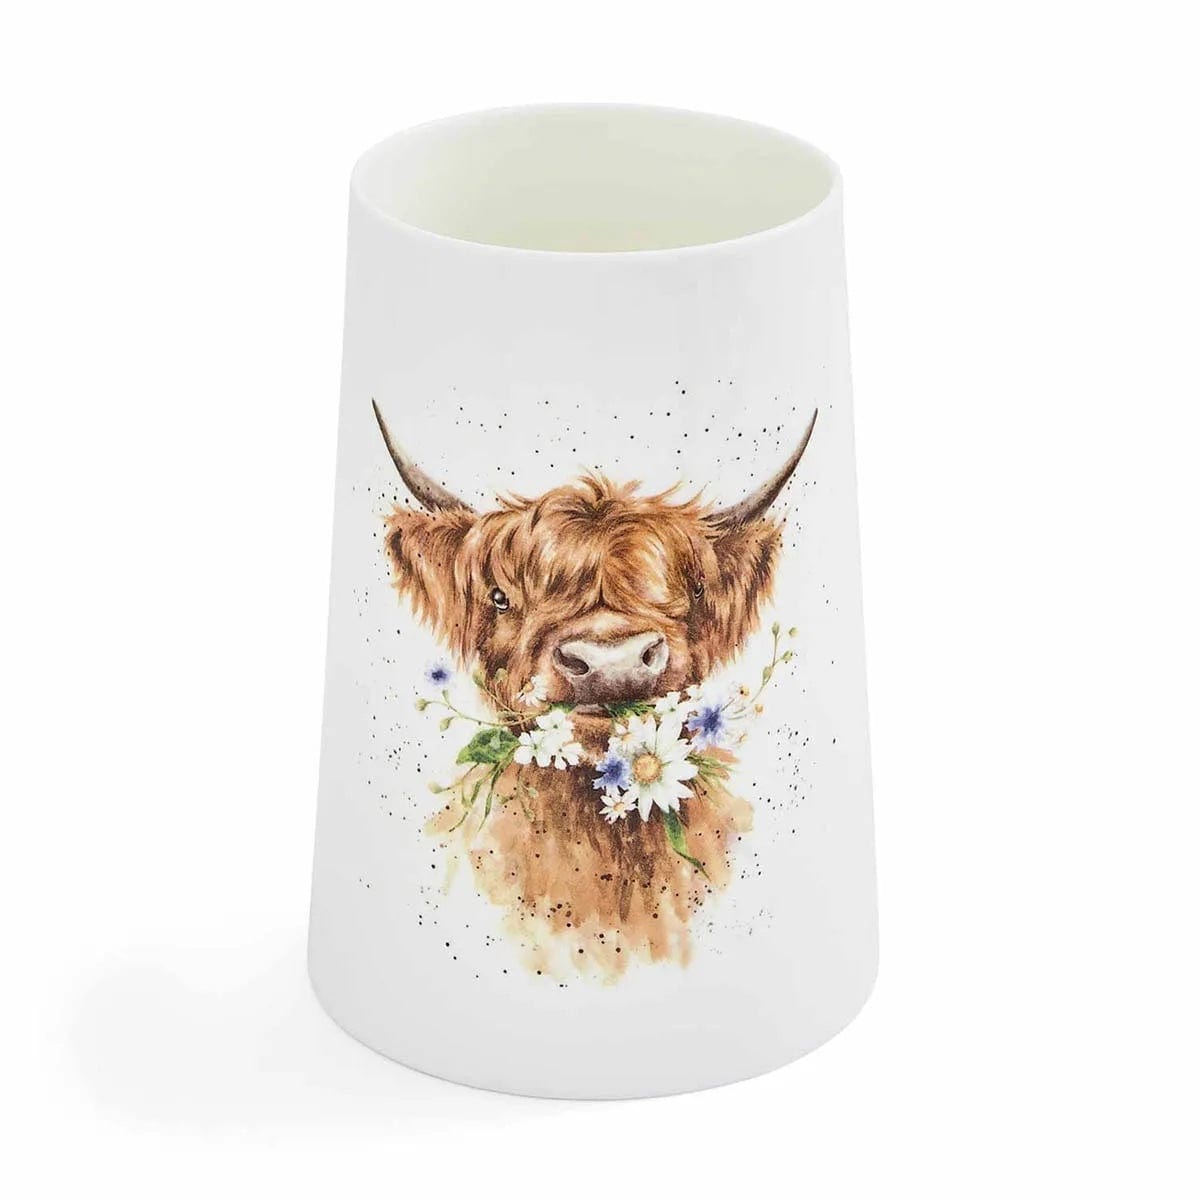 Wrendale Designs Home accessories Bone China Vase with Highland Cow Design